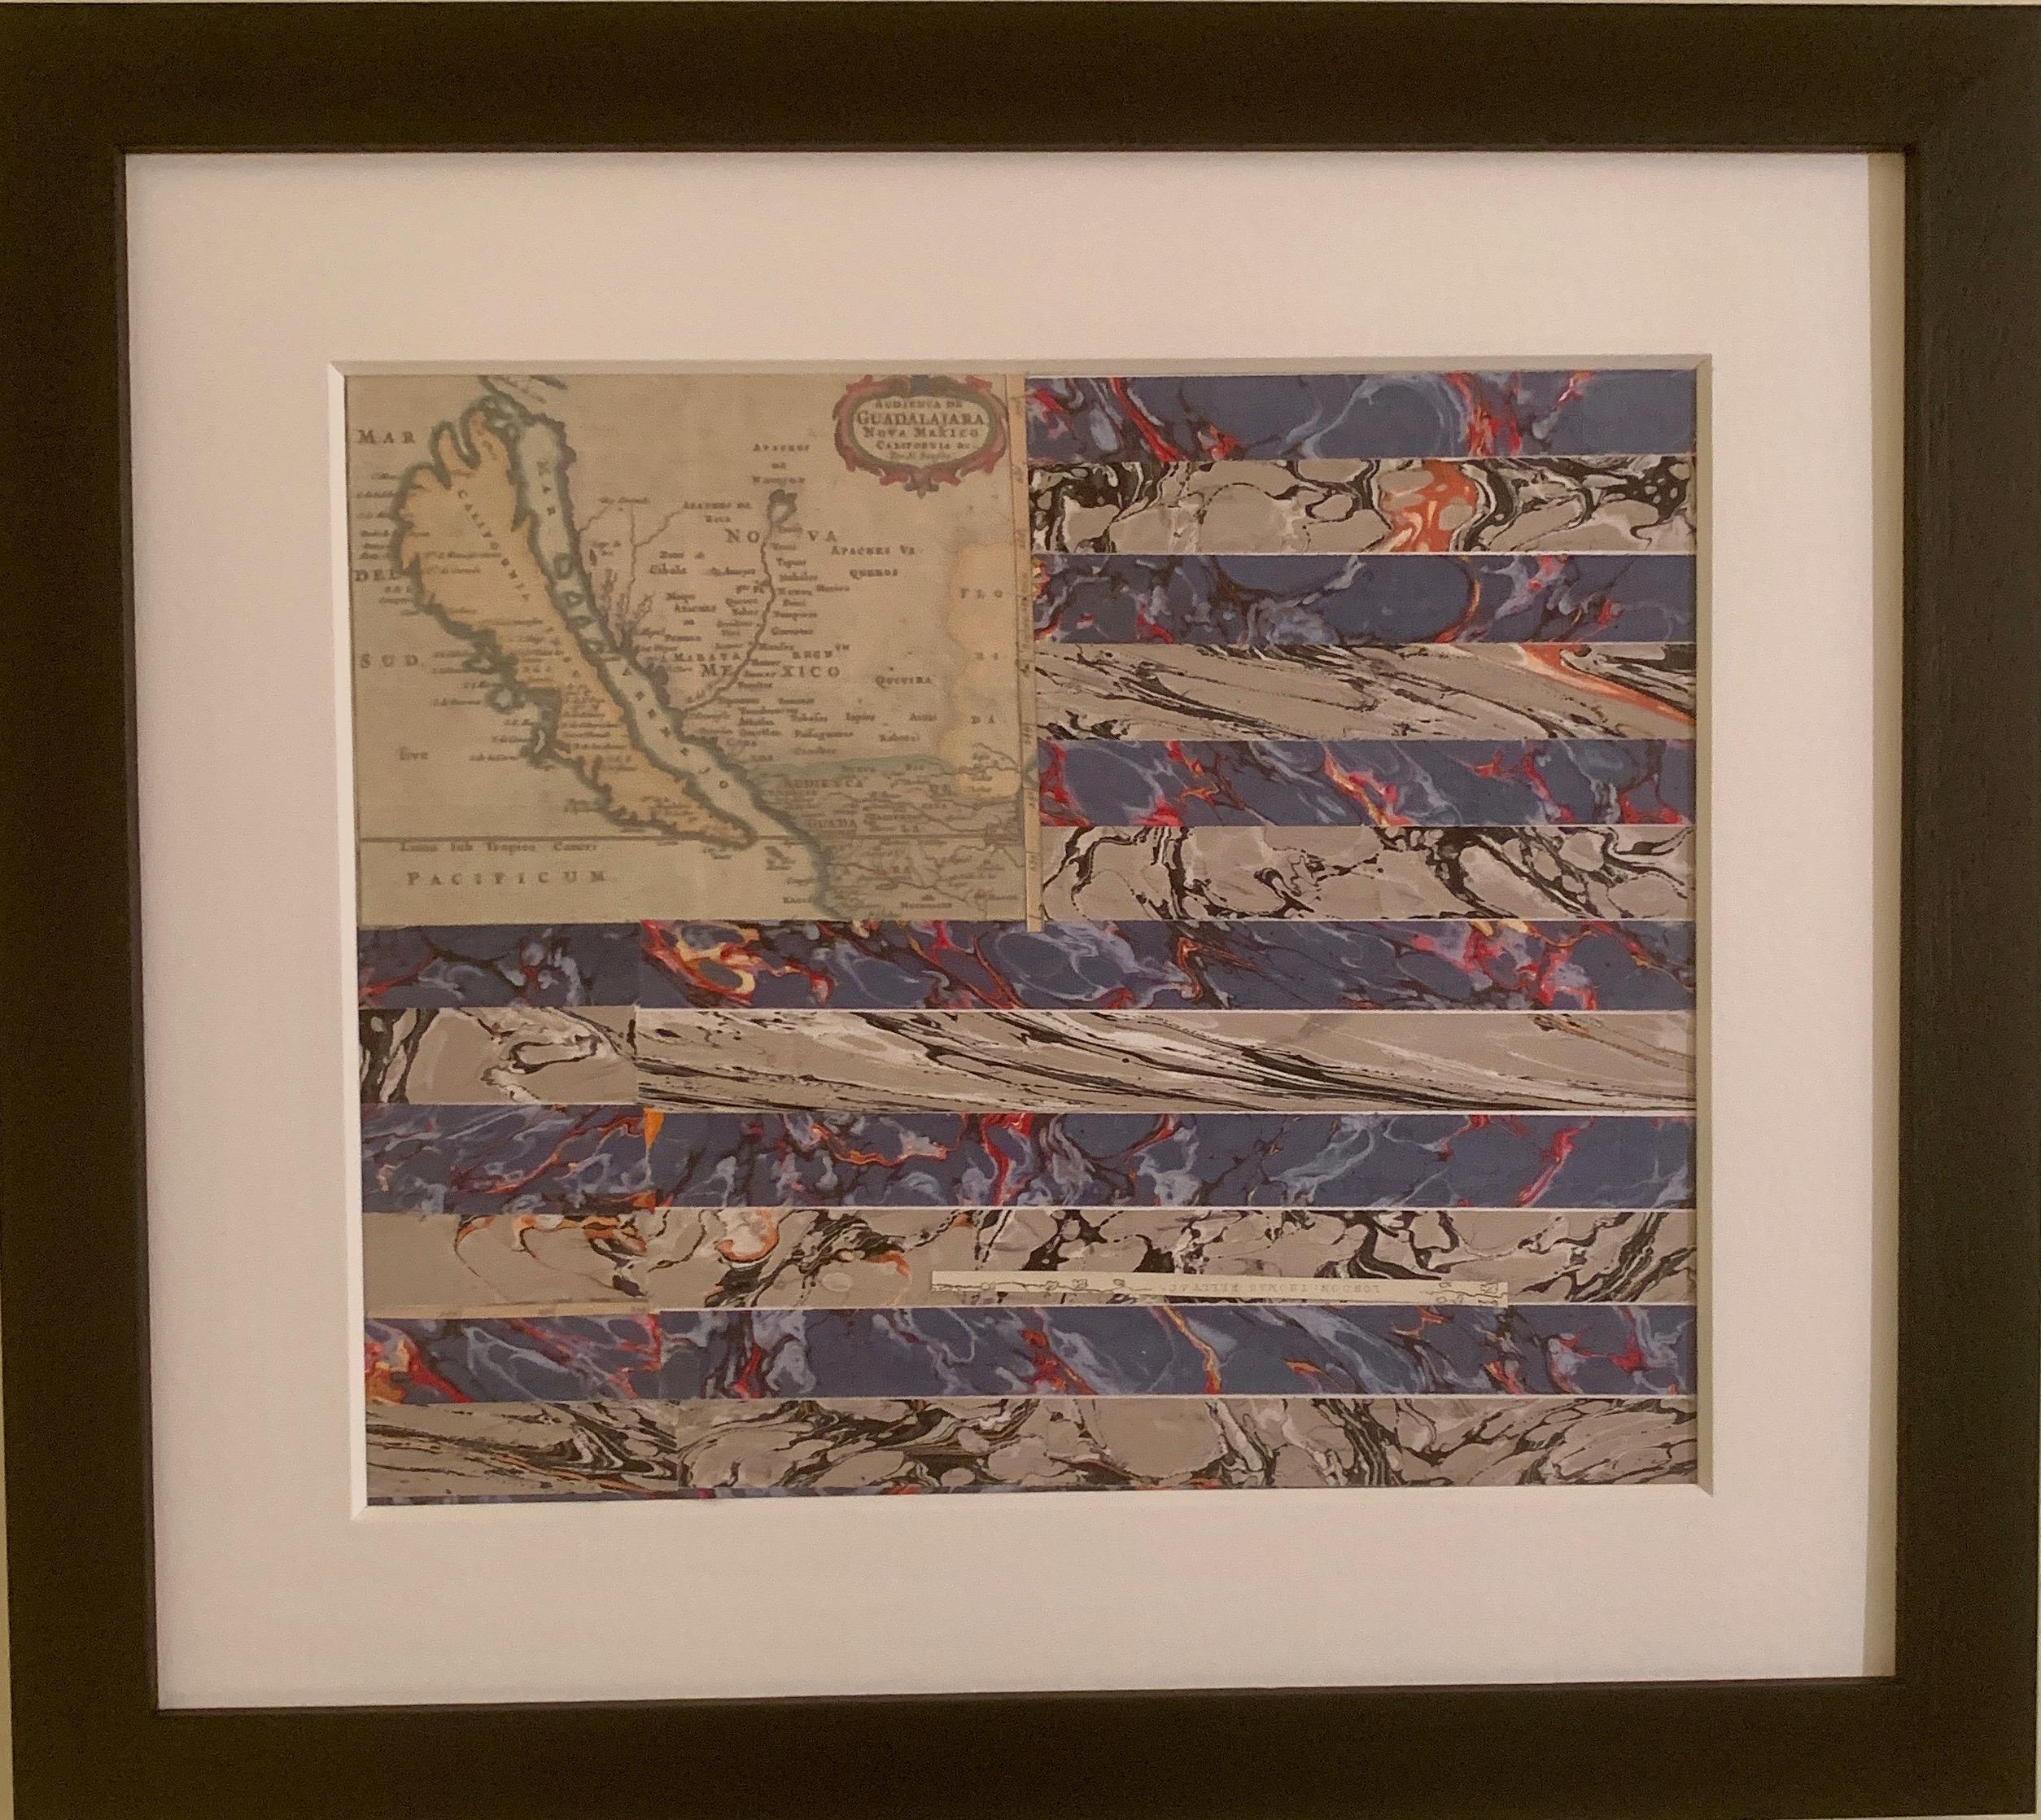 American flag collage with a colored print of California as an Island